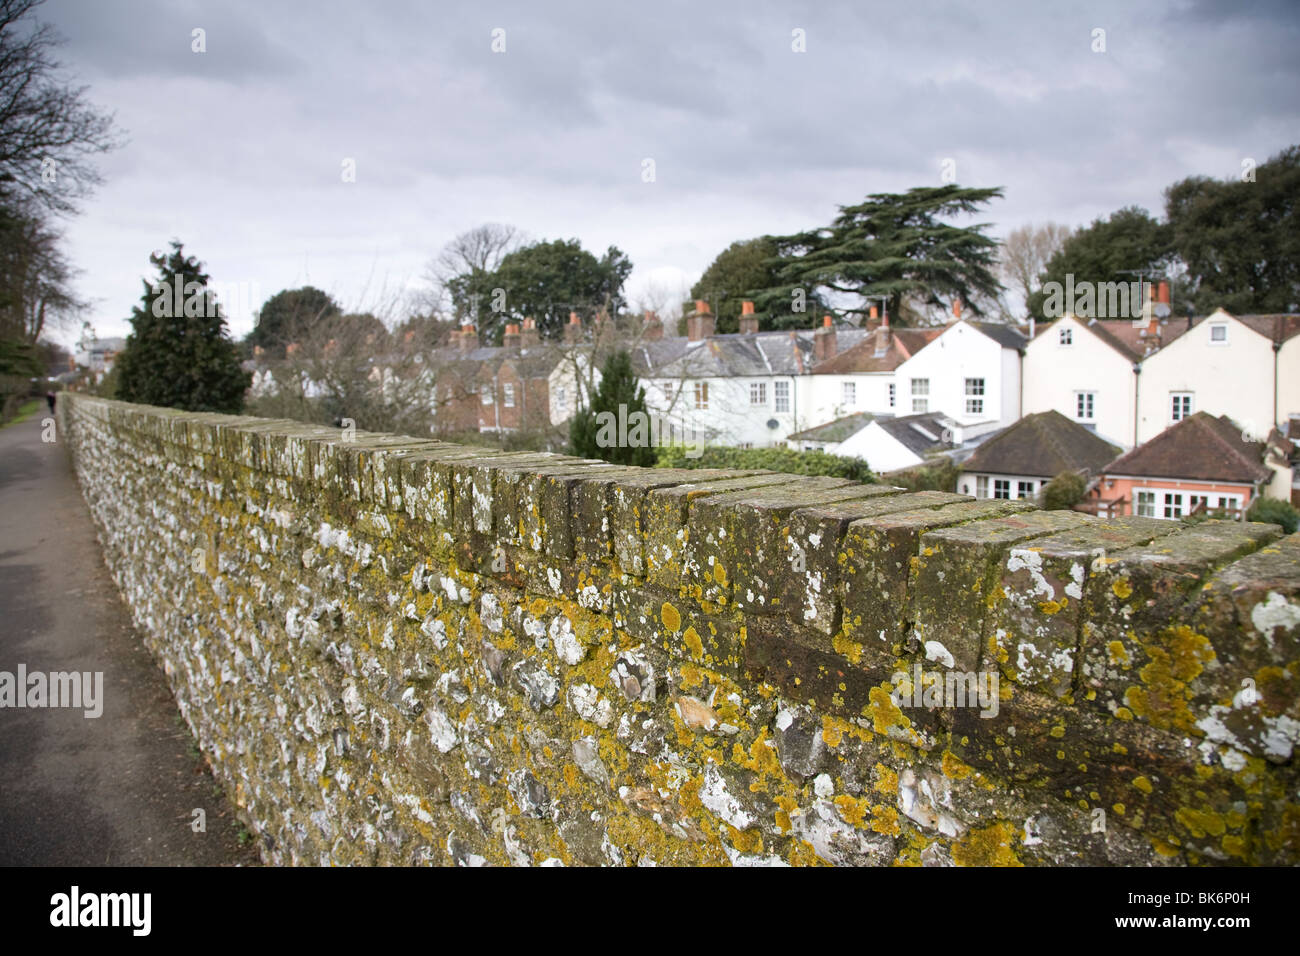 View from the Roman city wall along the foothpath and surrounding houses, Chichester, West Sussex, England. Stock Photo